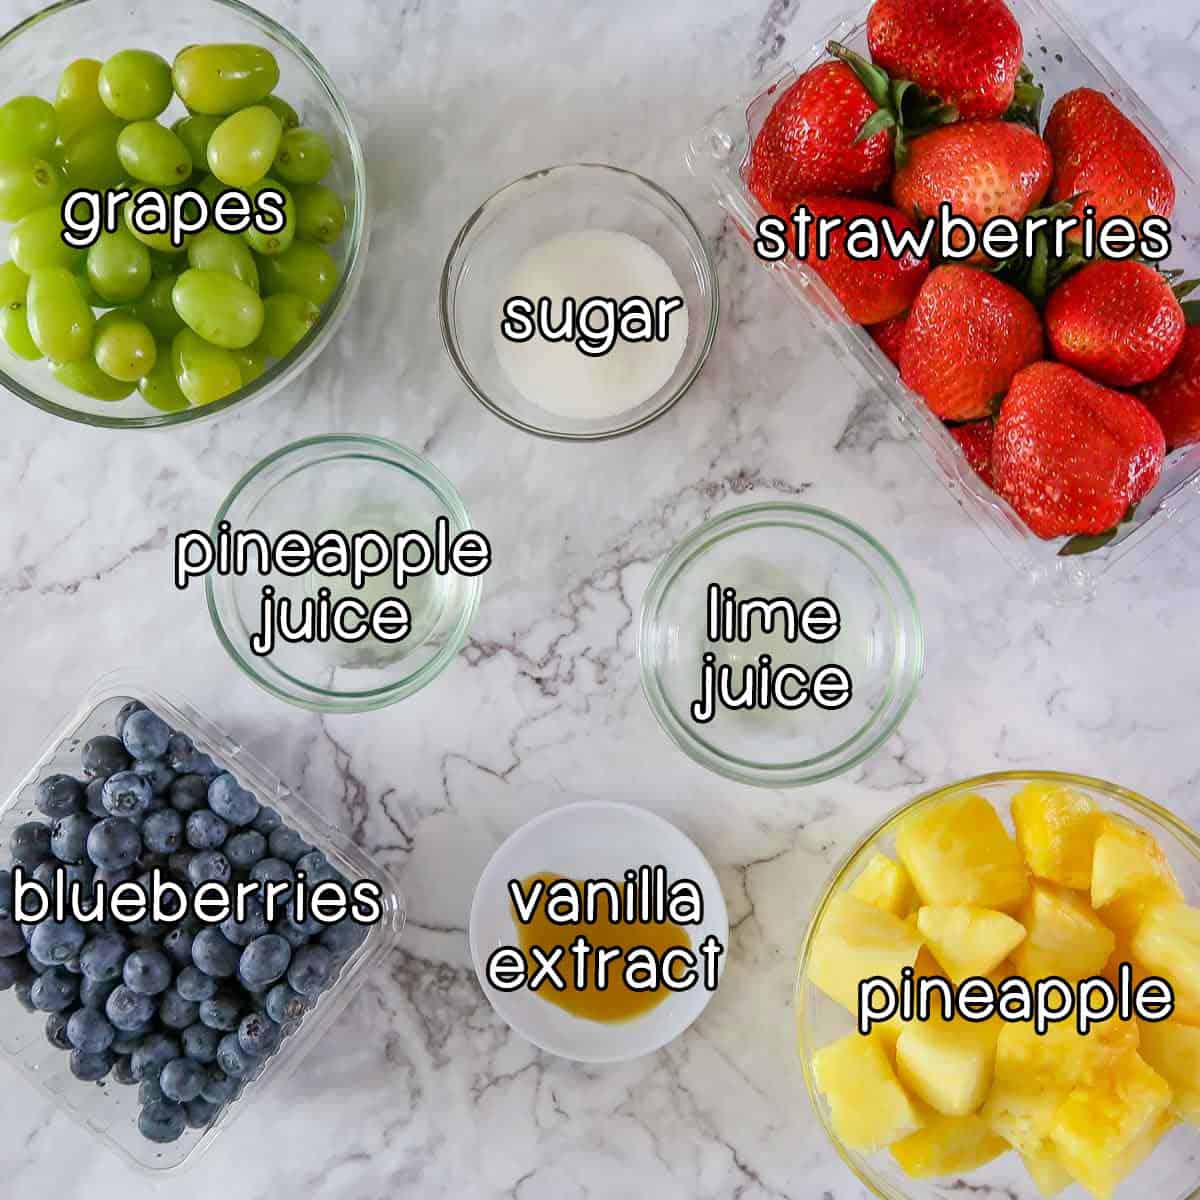 Overhead shot of ingredients- strawberries, grapes, blueberries, pineapple, sugar, pineapple juice, lime juice, and vanilla extract.